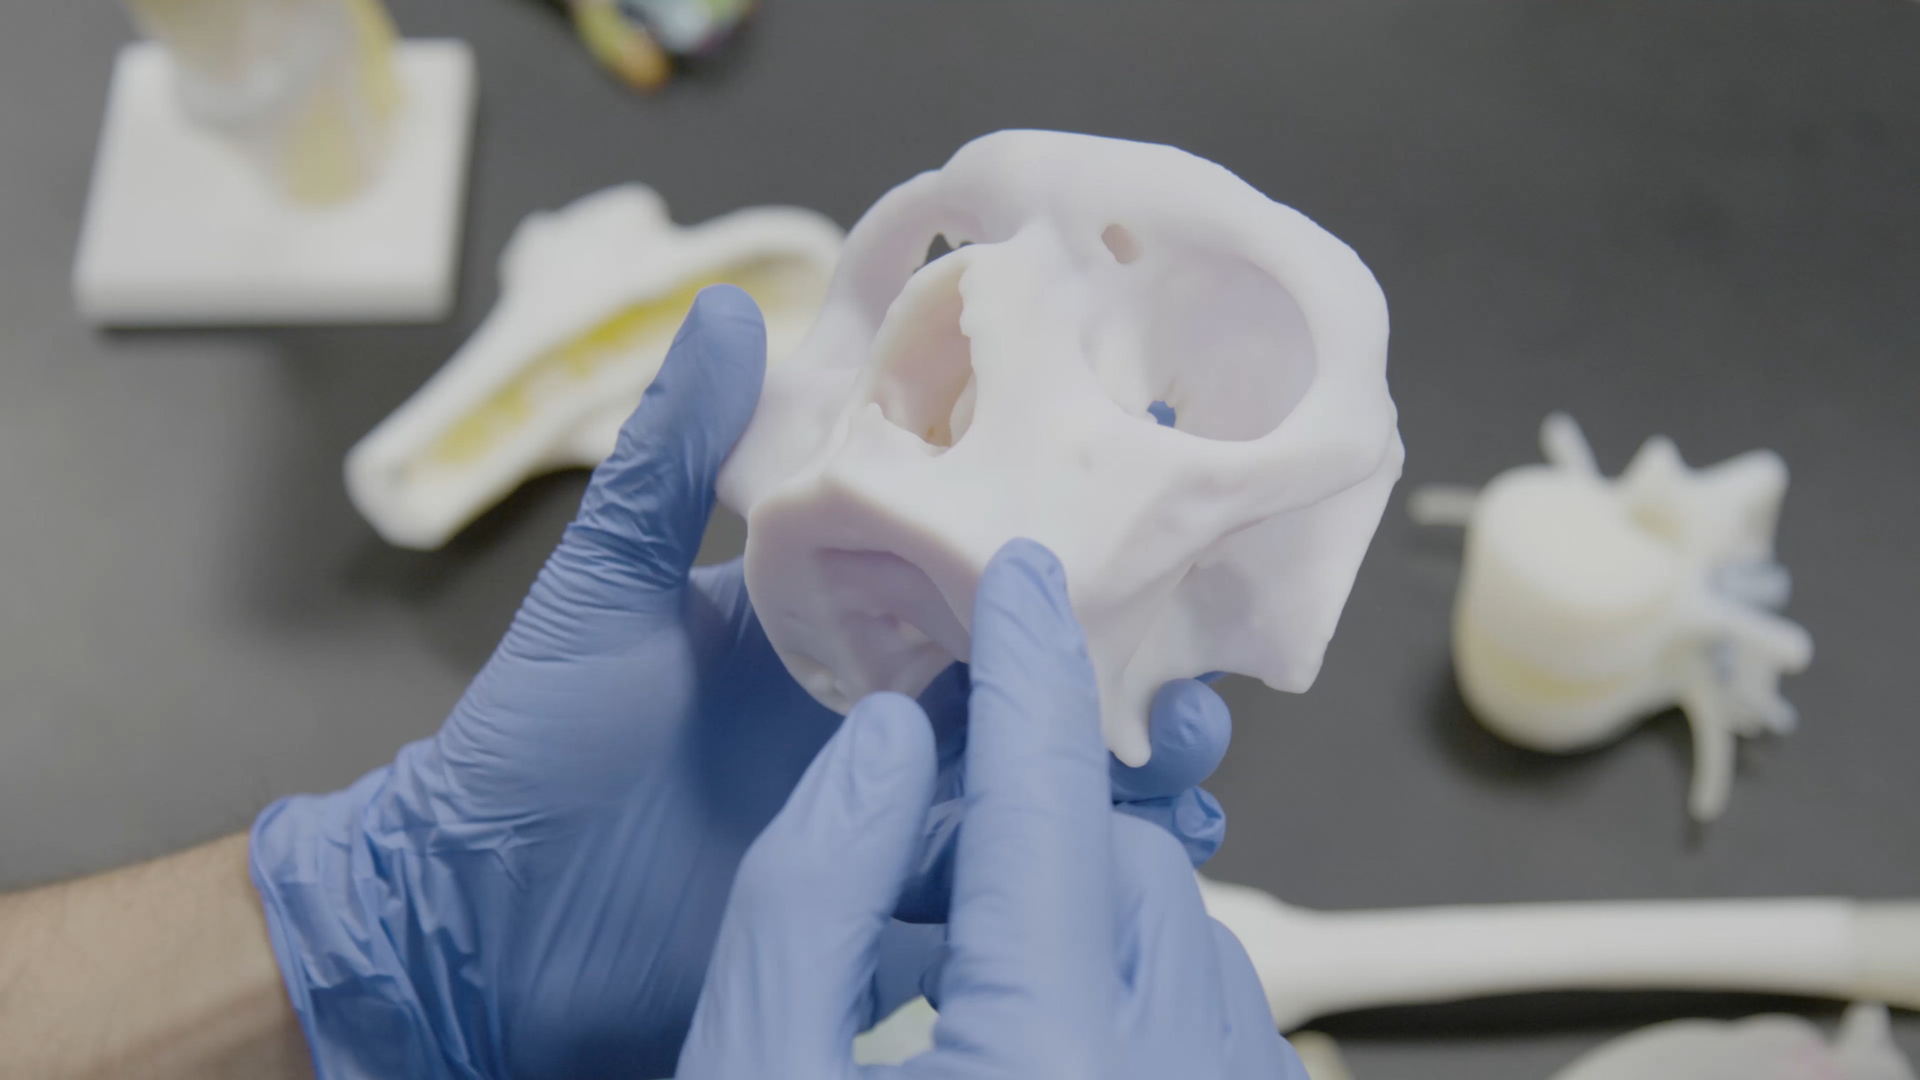 RICOH 3D for Healthcare has received 510(k) clearance from the FDA for its craniomaxillofacial and orthopedic patient-specific anatomic modeling.